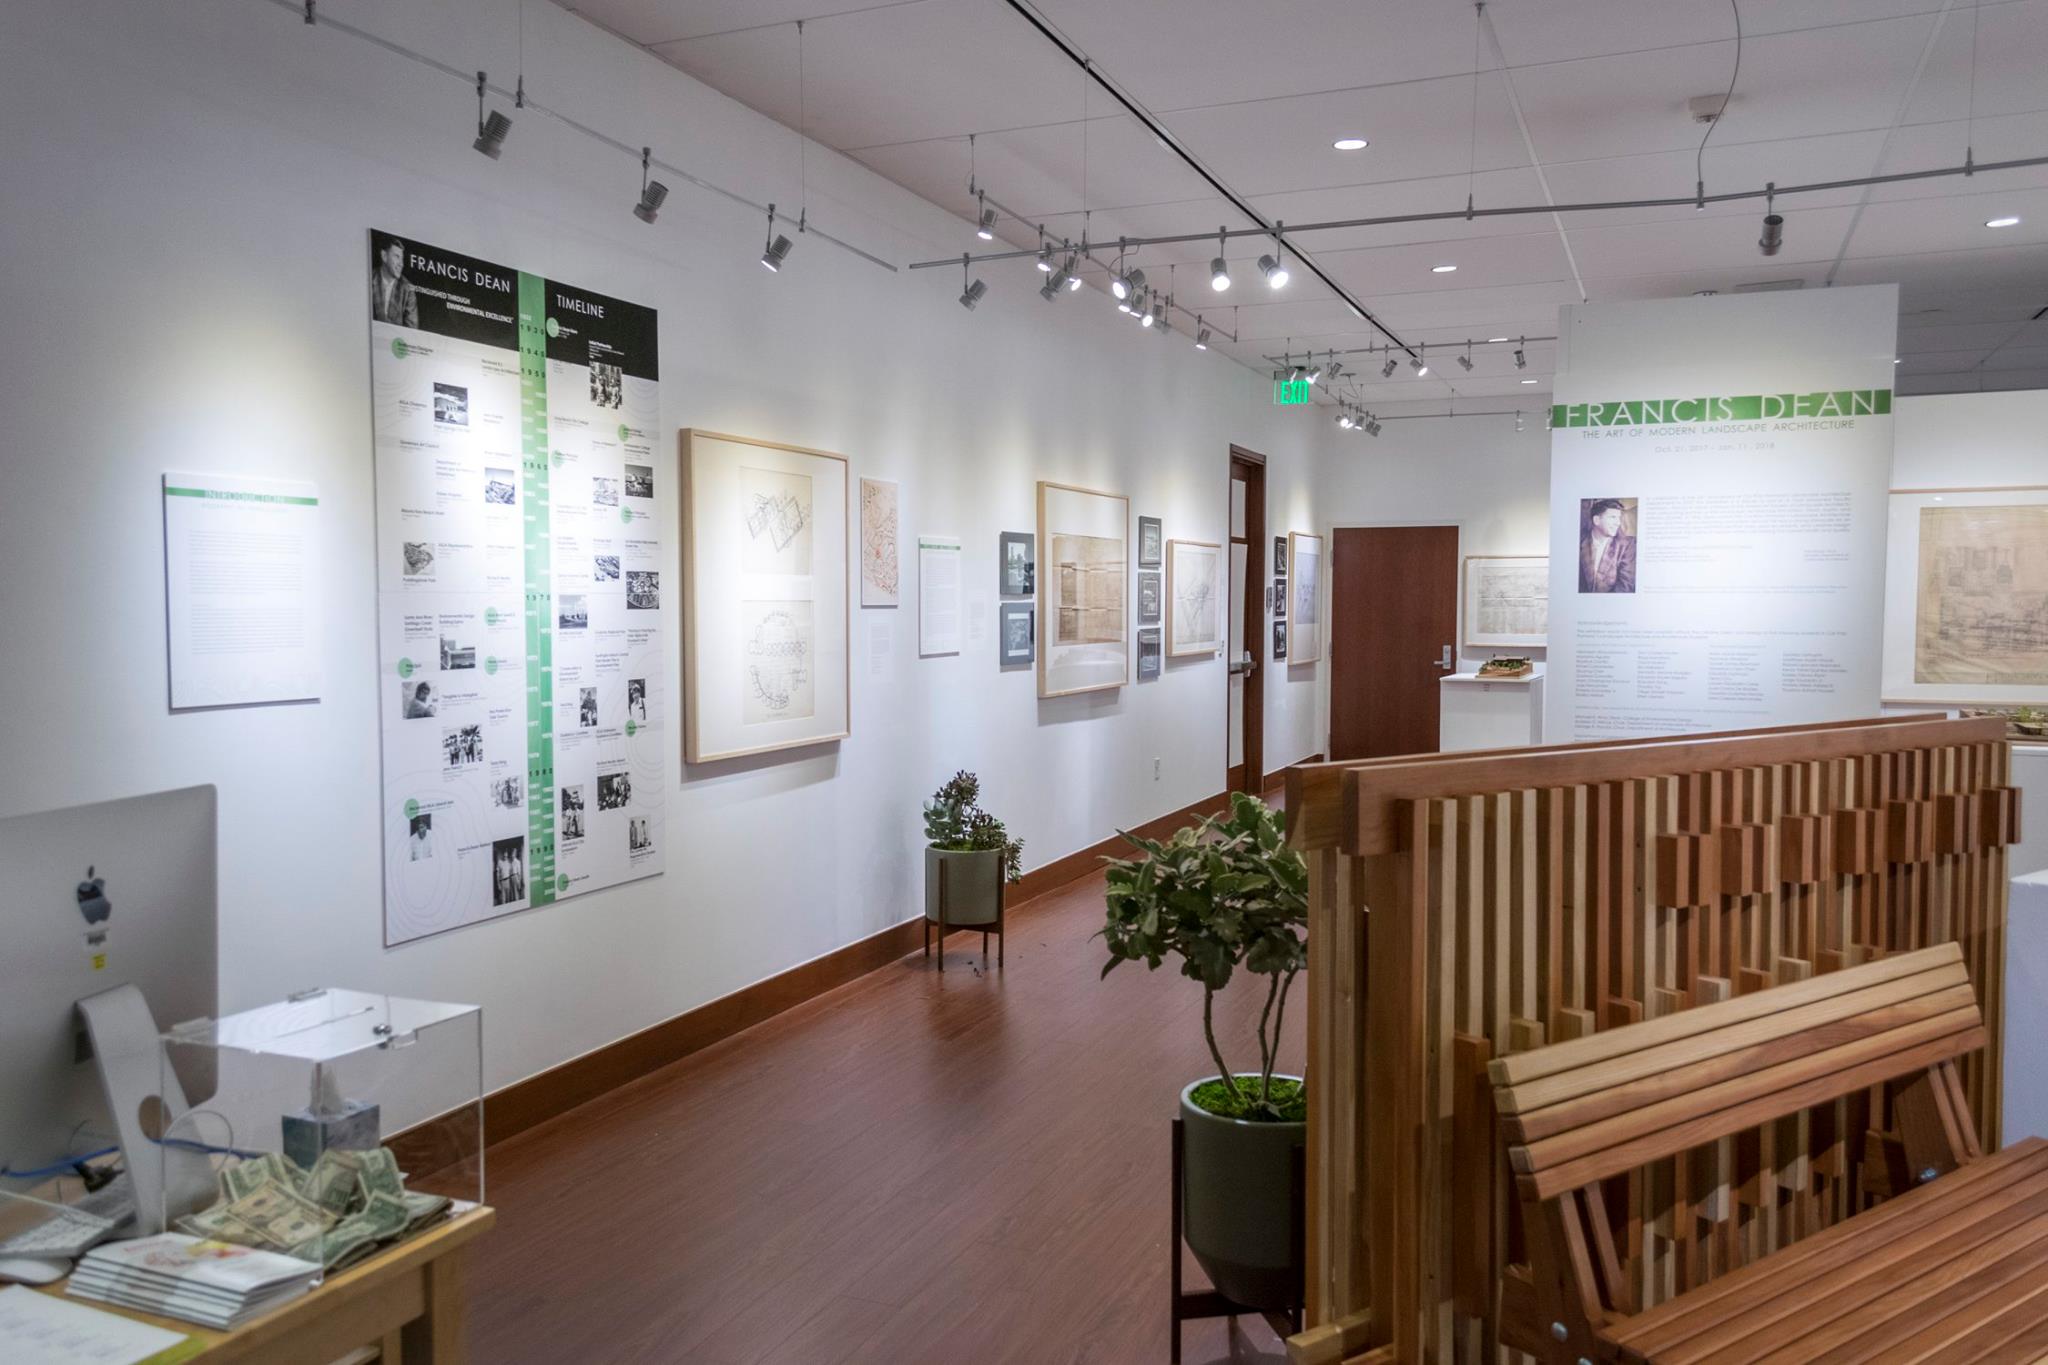 Installation View, Front of Gallery, Francis Dean: The Art of Modern Landscape Architecture Exhibition, 2017.